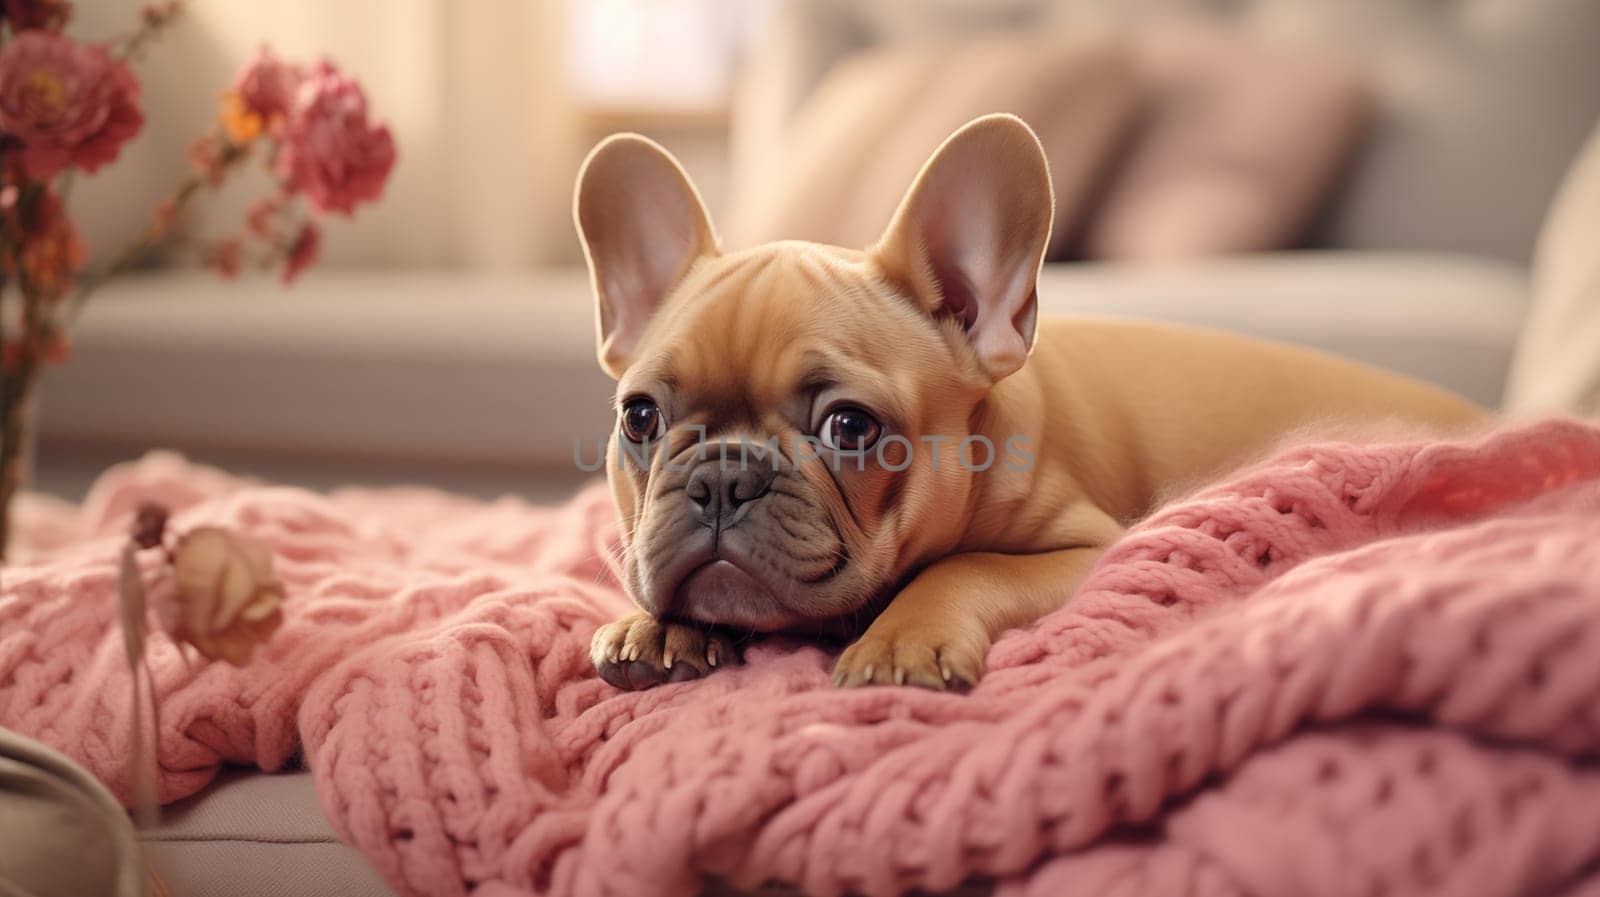 Cute red French bulldog puppy lying on a pink cozy blanket, in the bedroom, warm light.